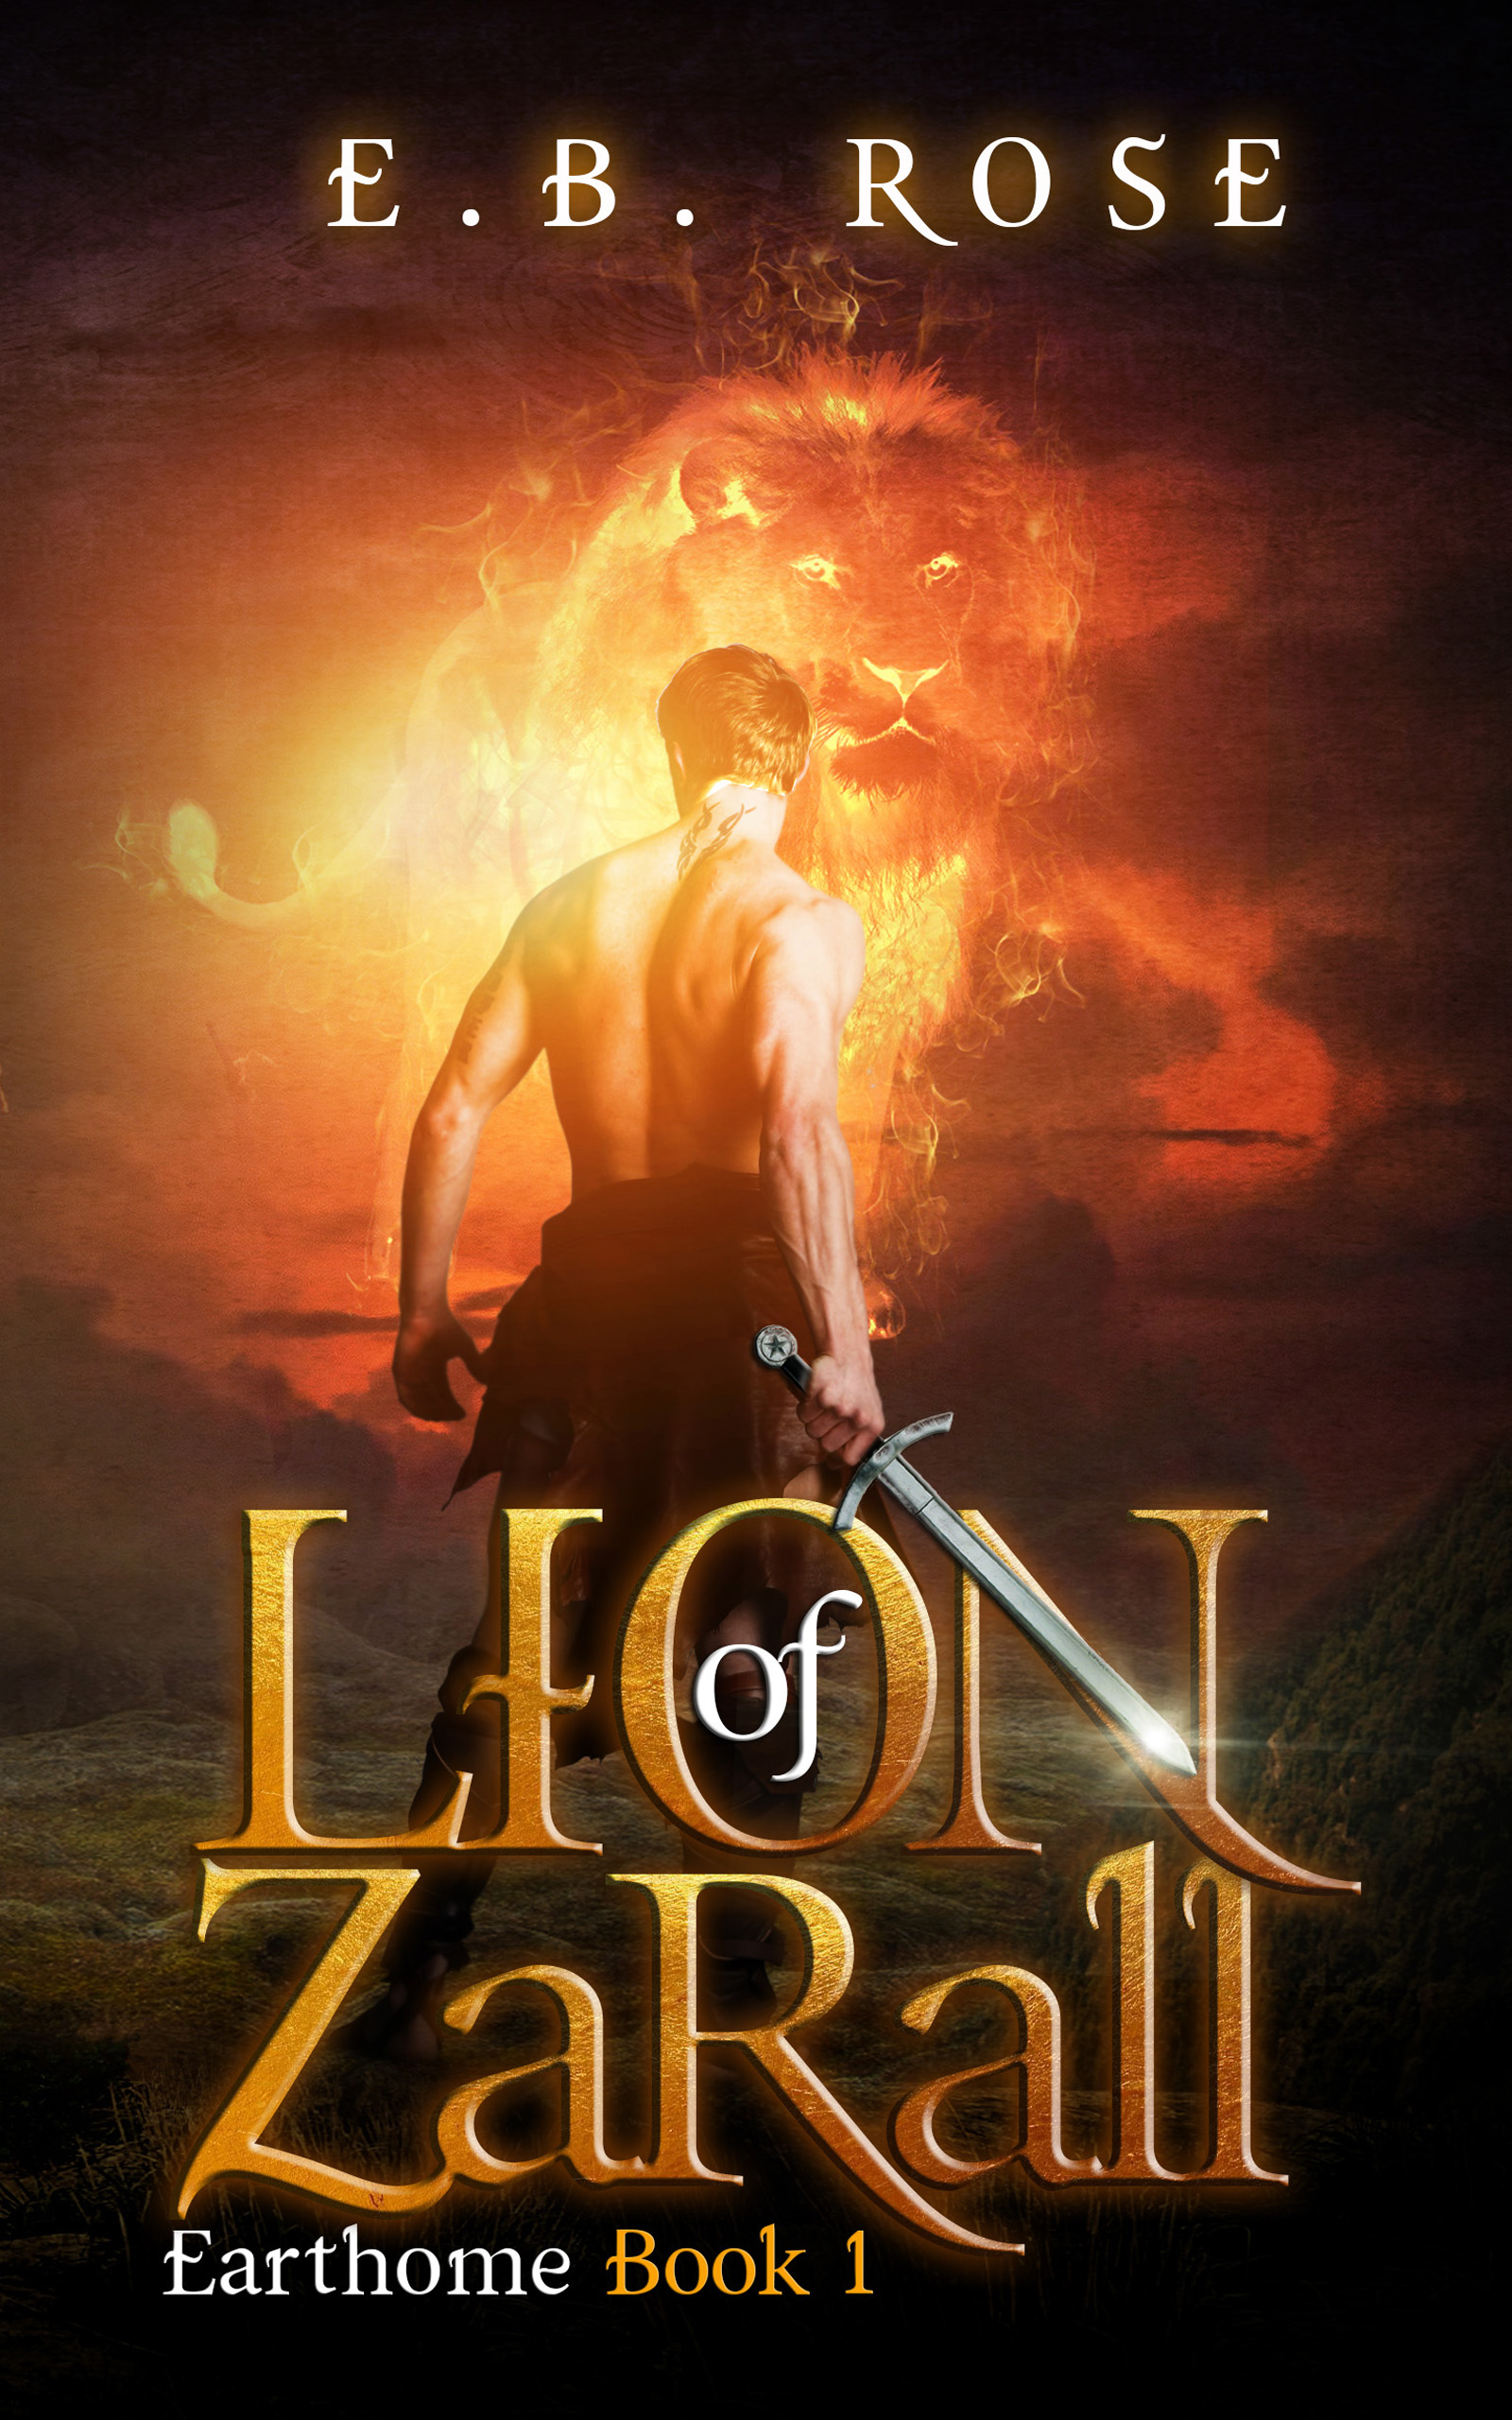 FREE: Lion of Zarall by E.B. Rose